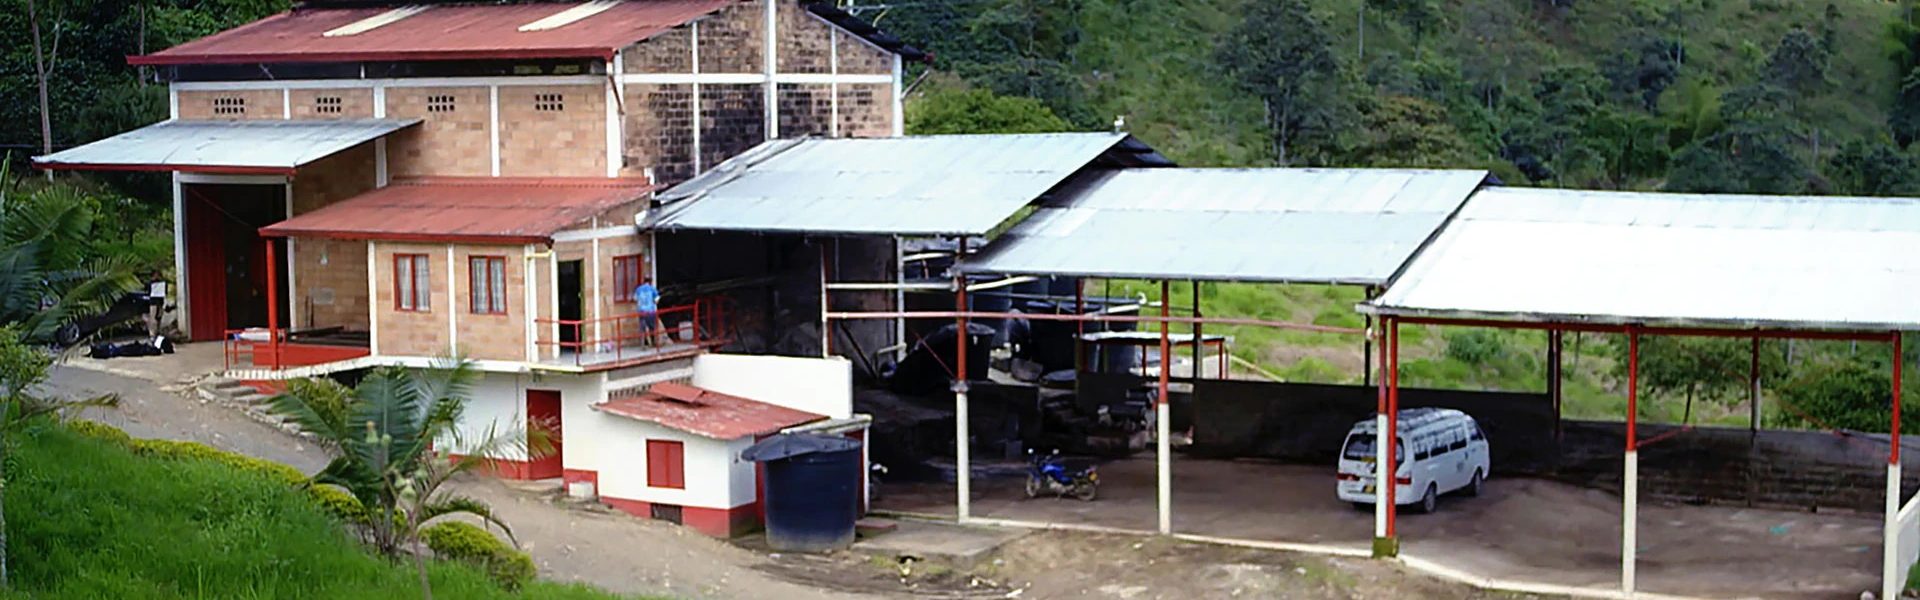 Explore Our Community Coffee Mill in Colombia